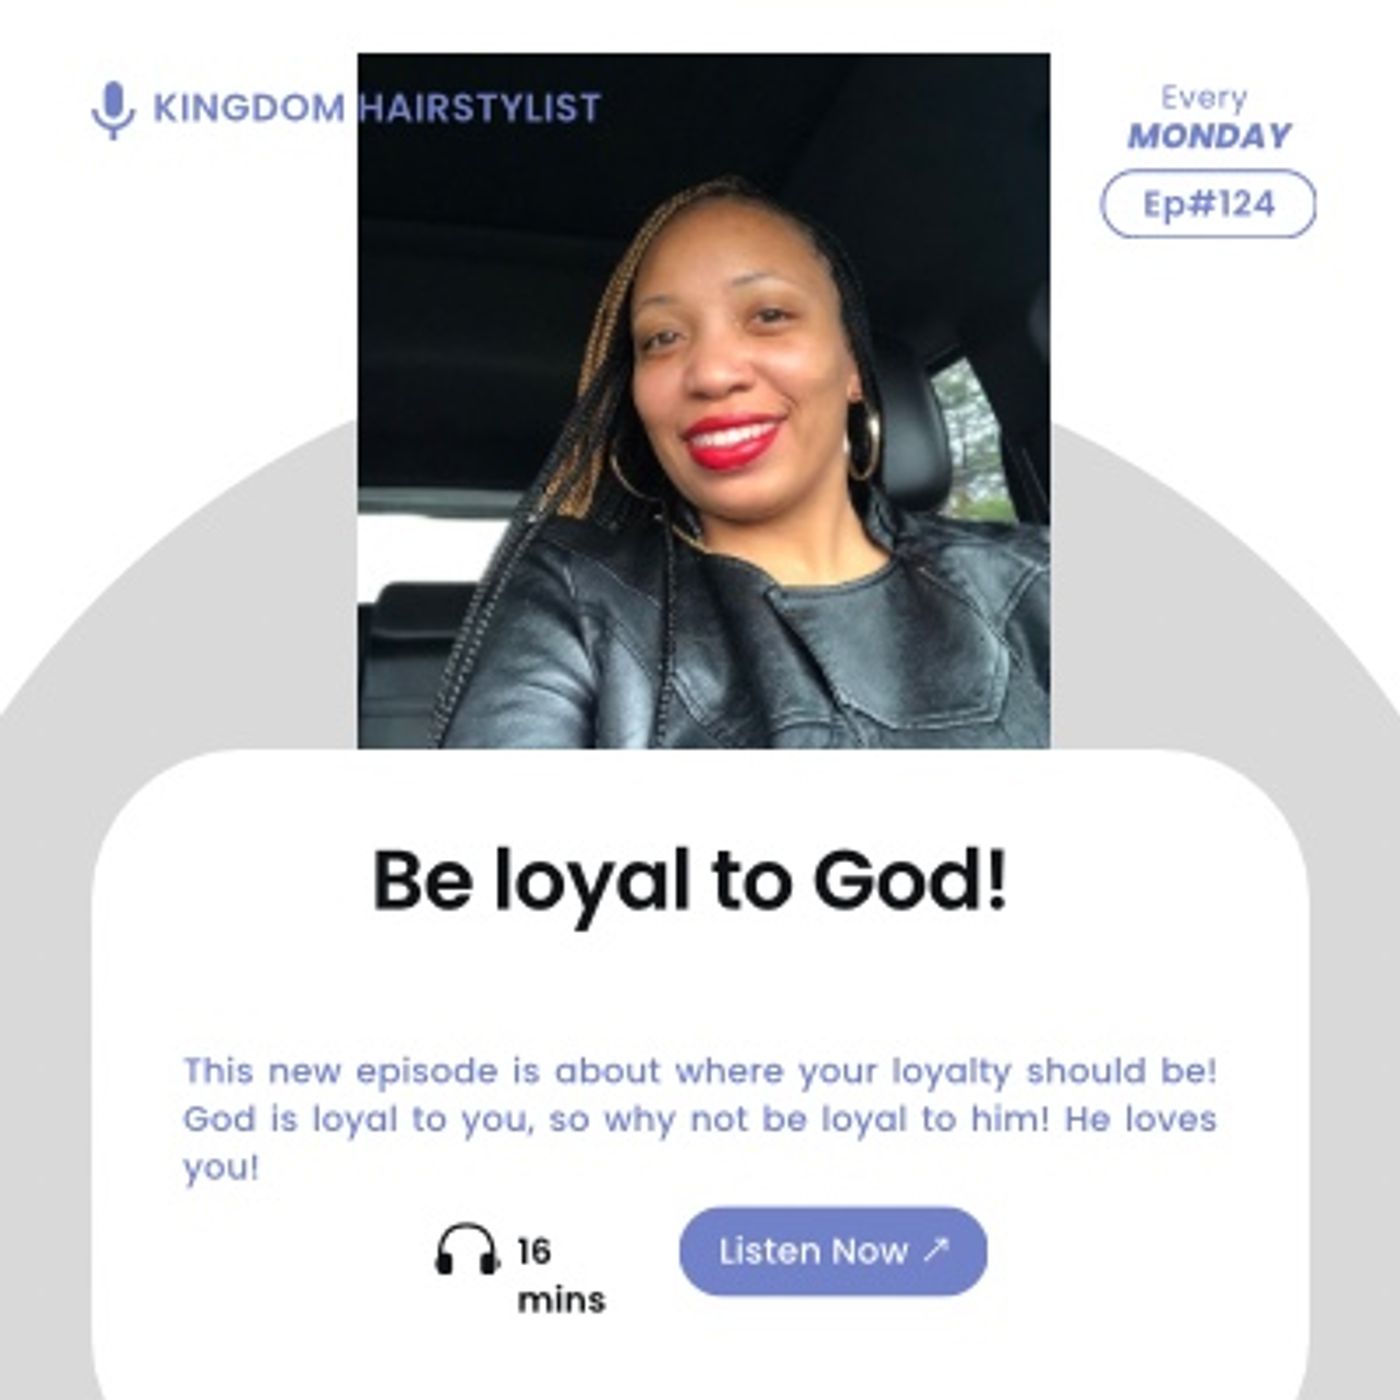 Episode 124 - Be loyal to God!